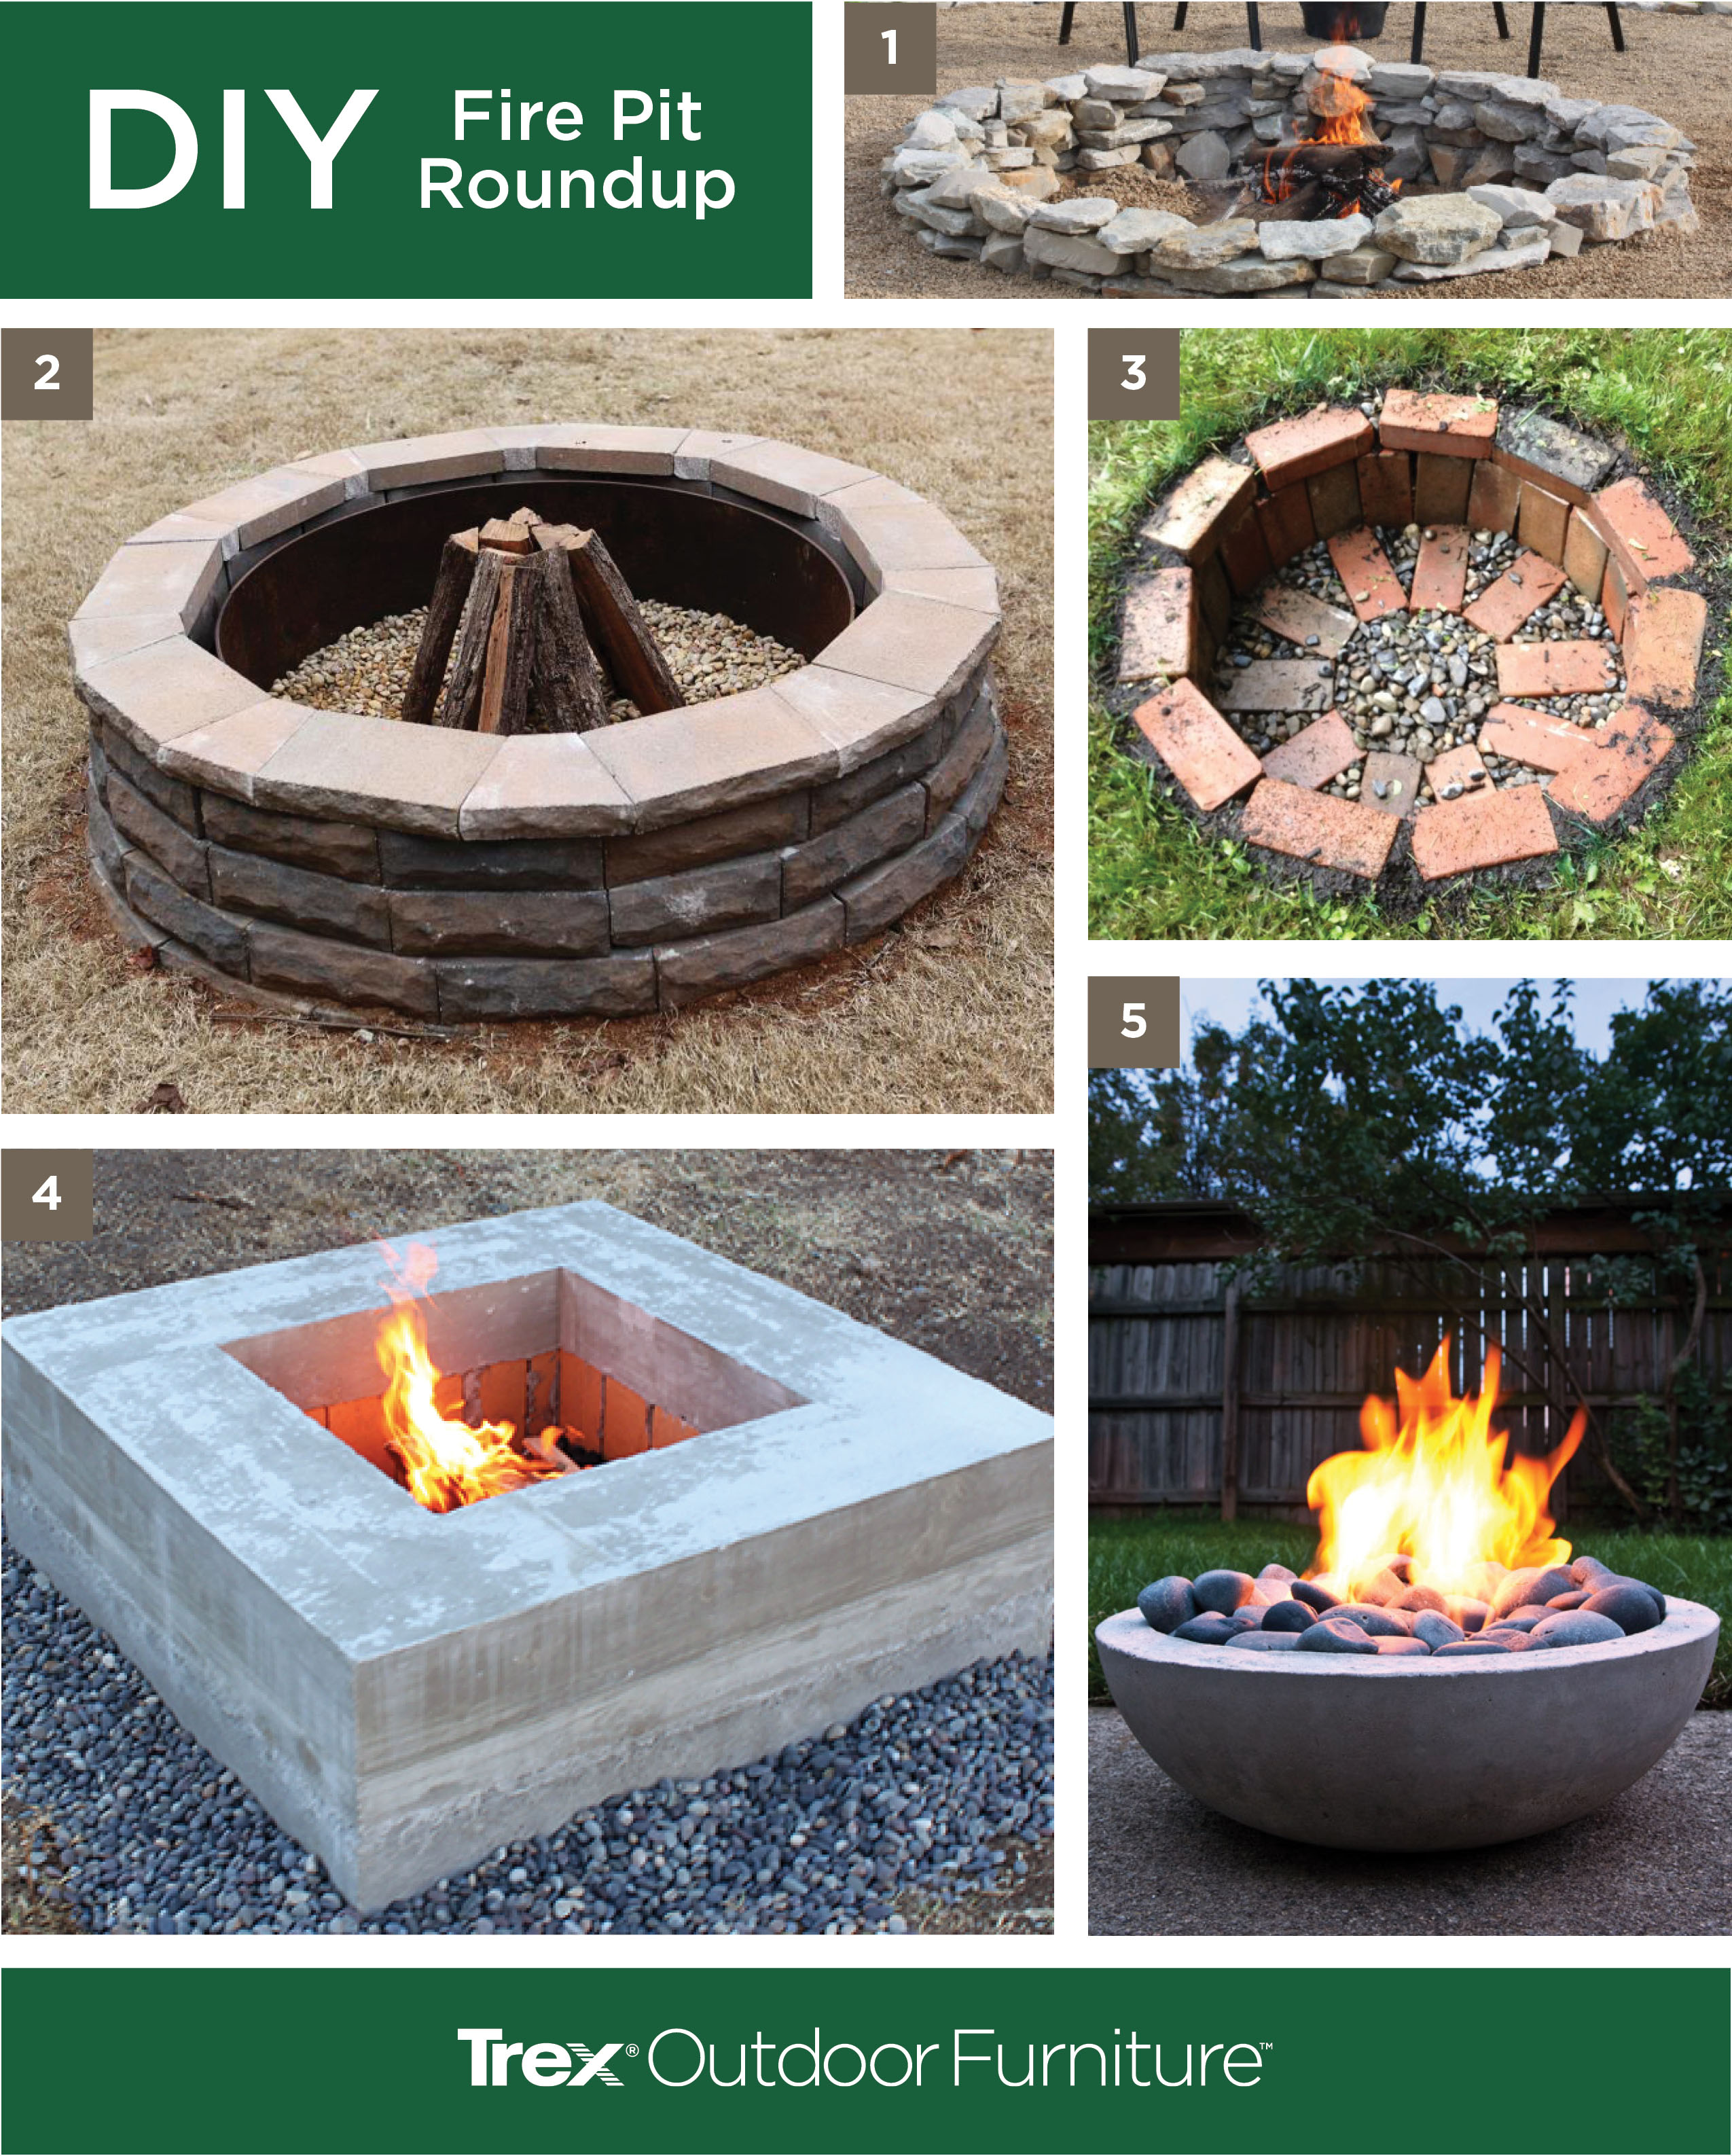 Warm Up With A Diy Fire Pit Living, Fire Pit Liner Ideas